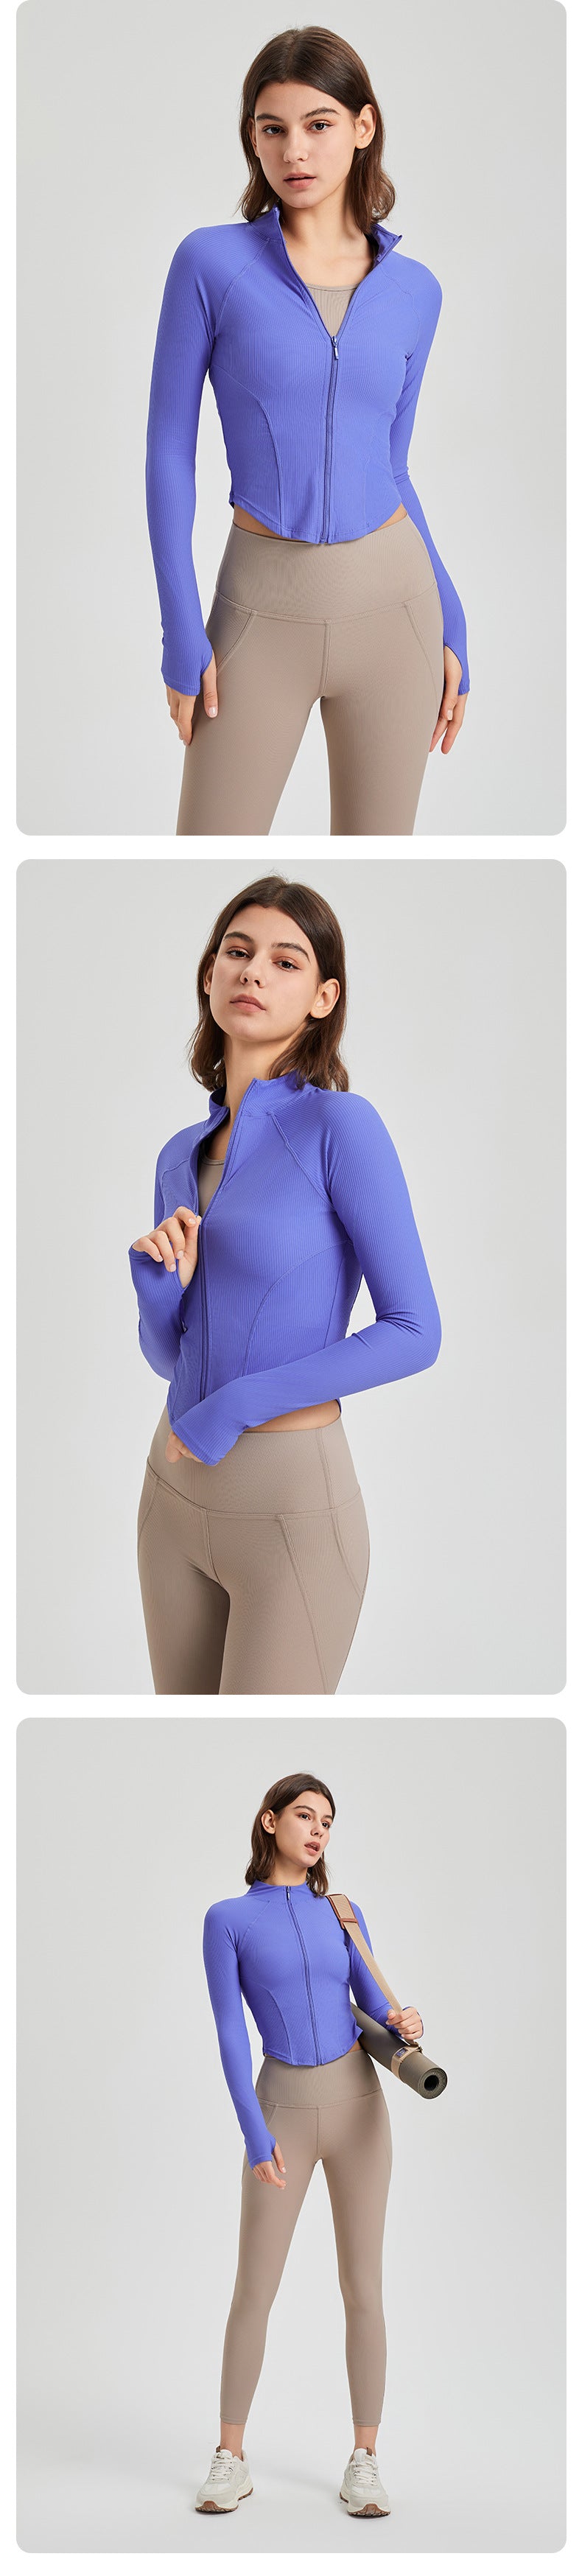 2023.08 Shaping yoga clothing women's casual jacket long-sleeved zipper hooded running skin-friendly sports fitness top